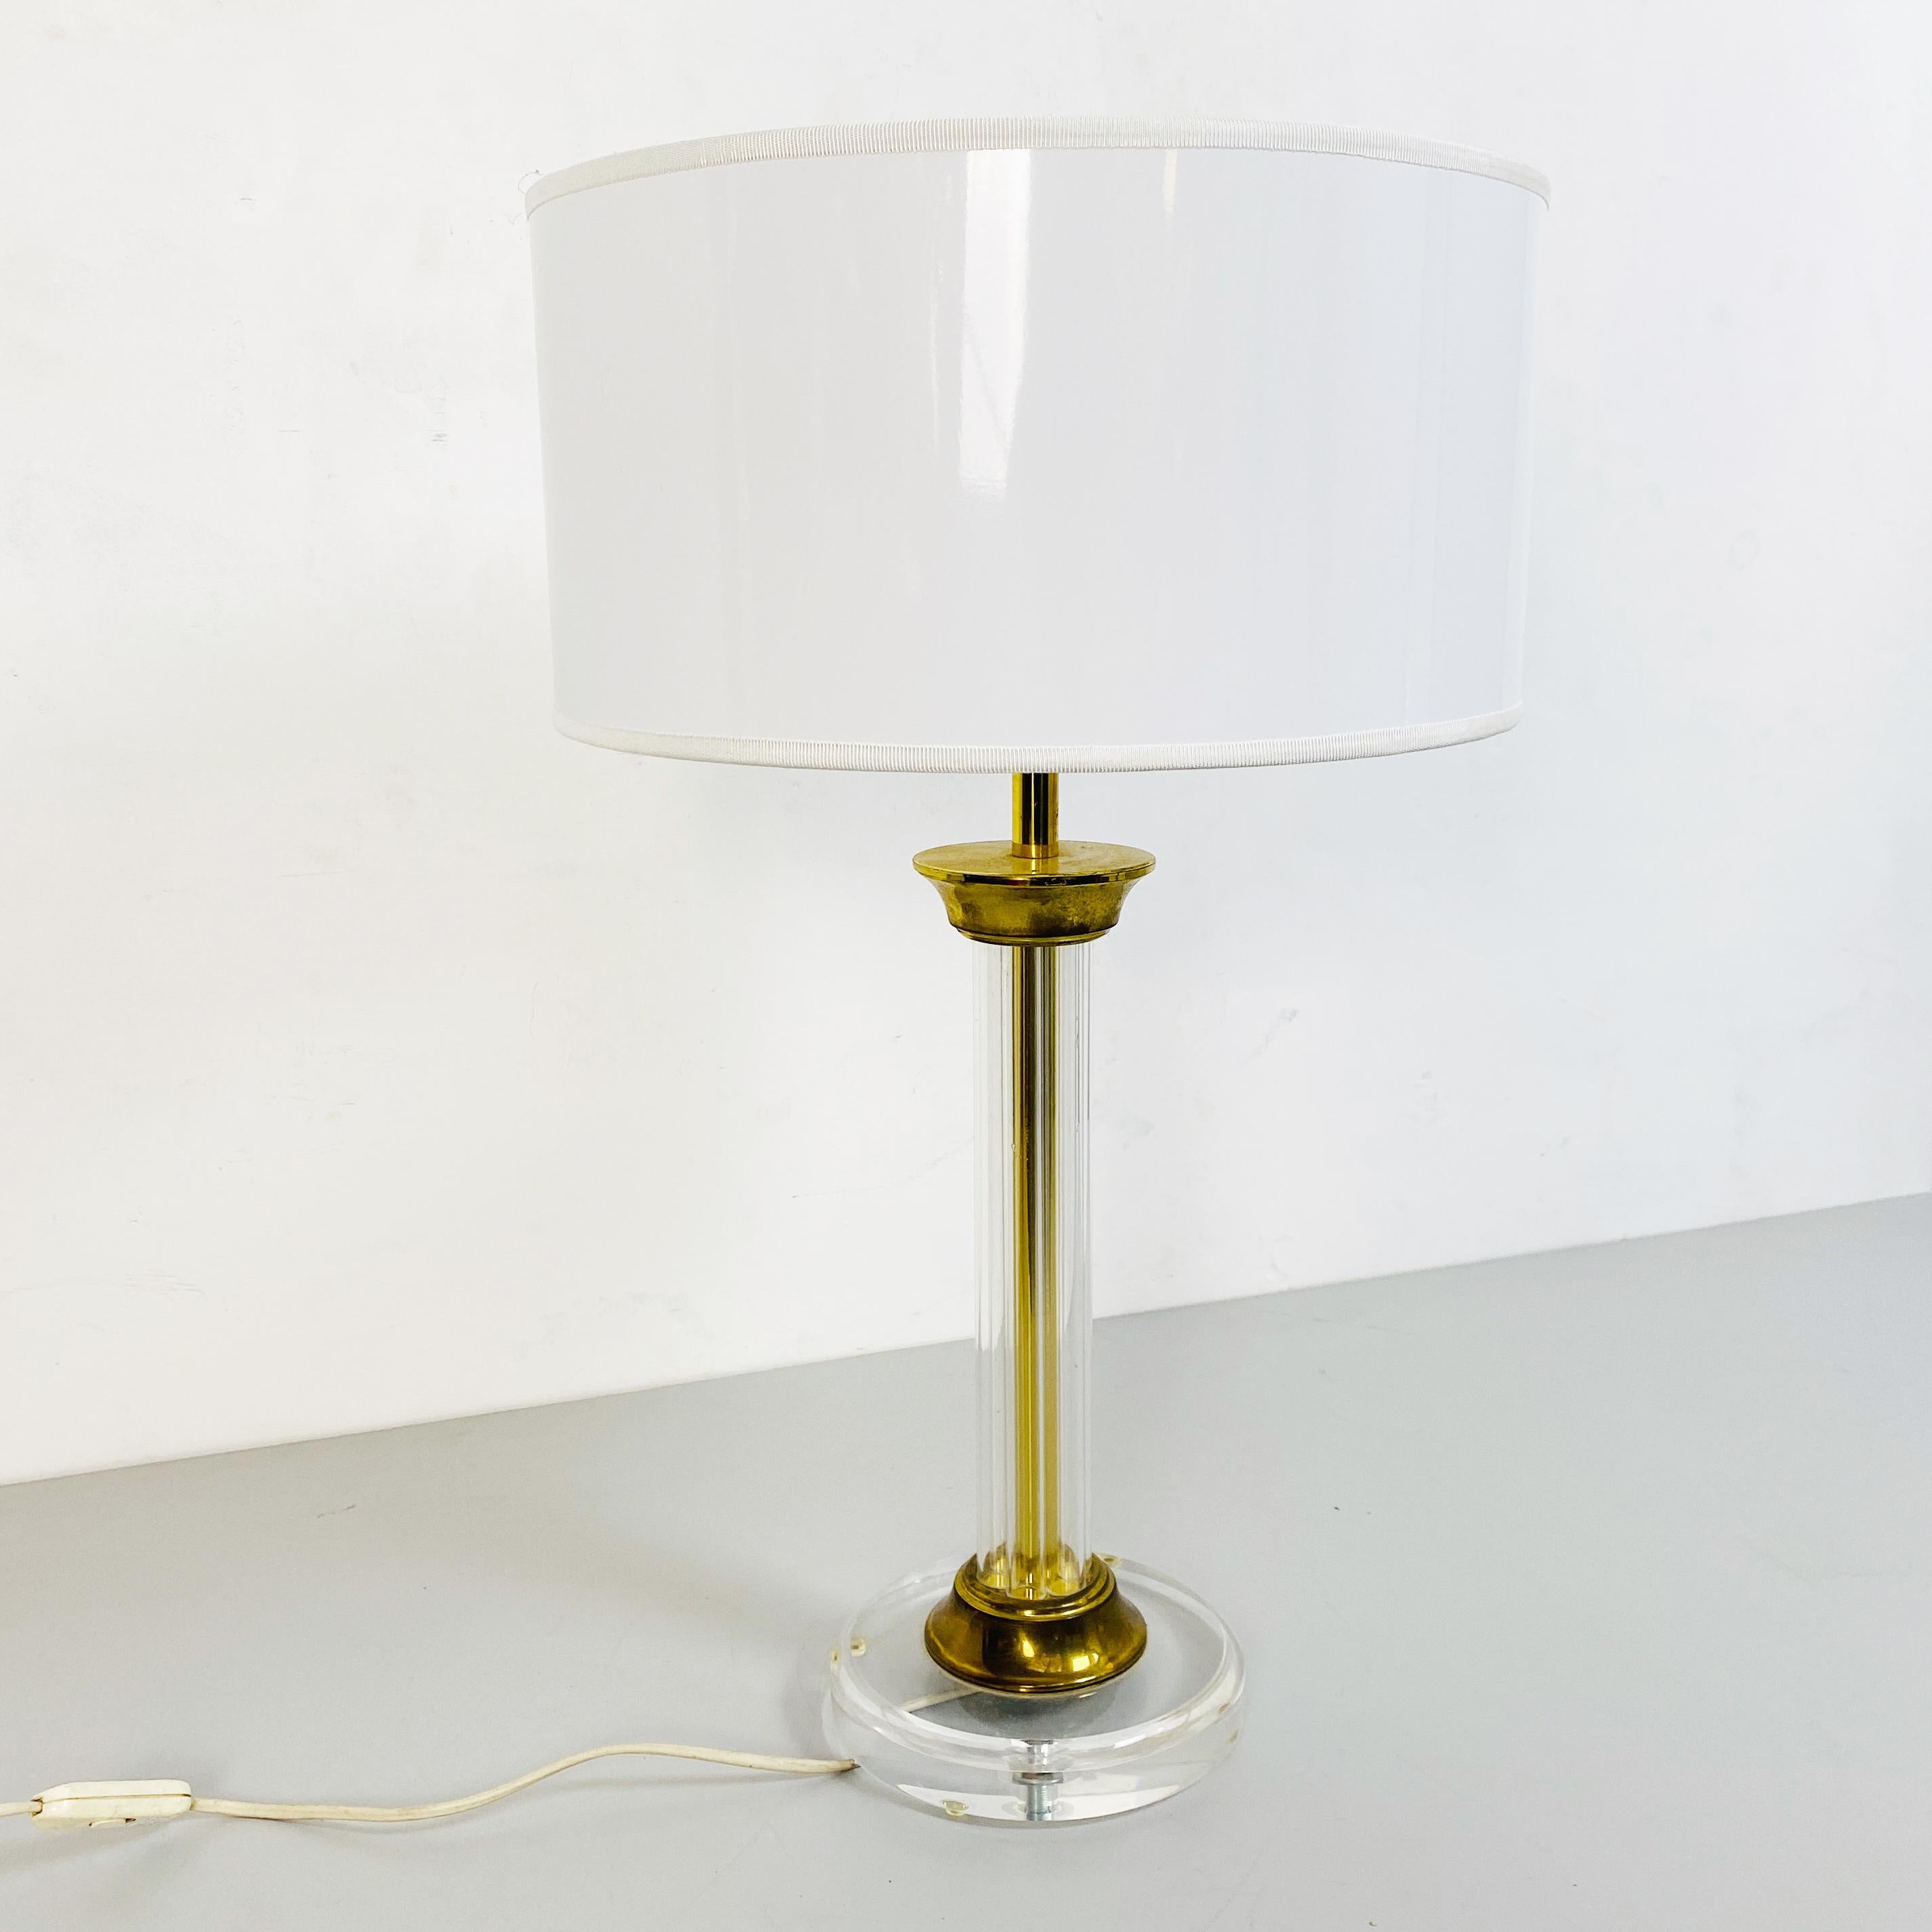 Italian Mid-Century Column-Shaped Plexiglass and Brass Table Lamp, 1970s In Good Condition For Sale In MIlano, IT